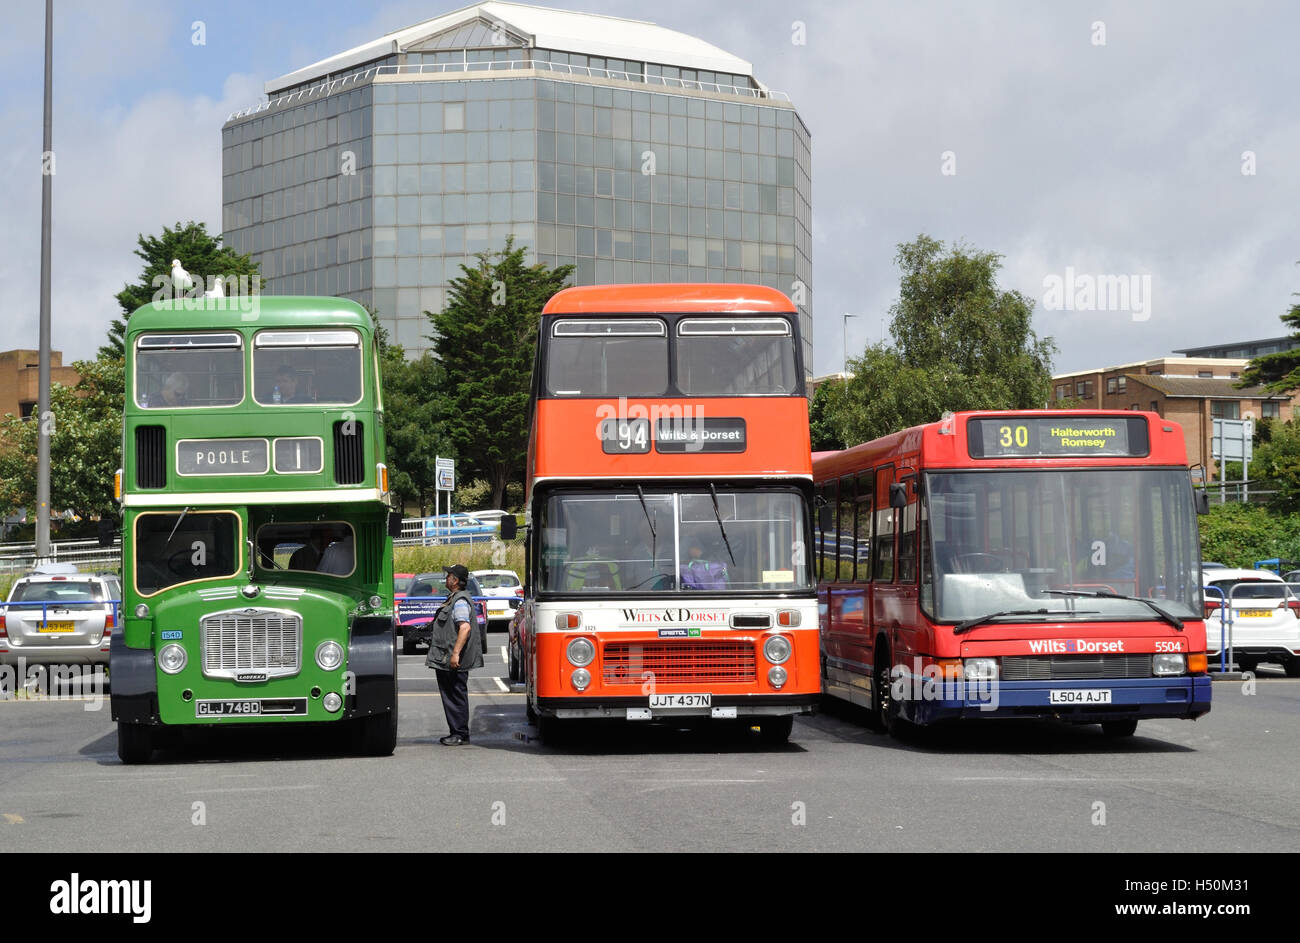 Hants & Dorset (now More Bus) celebrates its 100th anniversary with a display of vintage buses and coaches Stock Photo